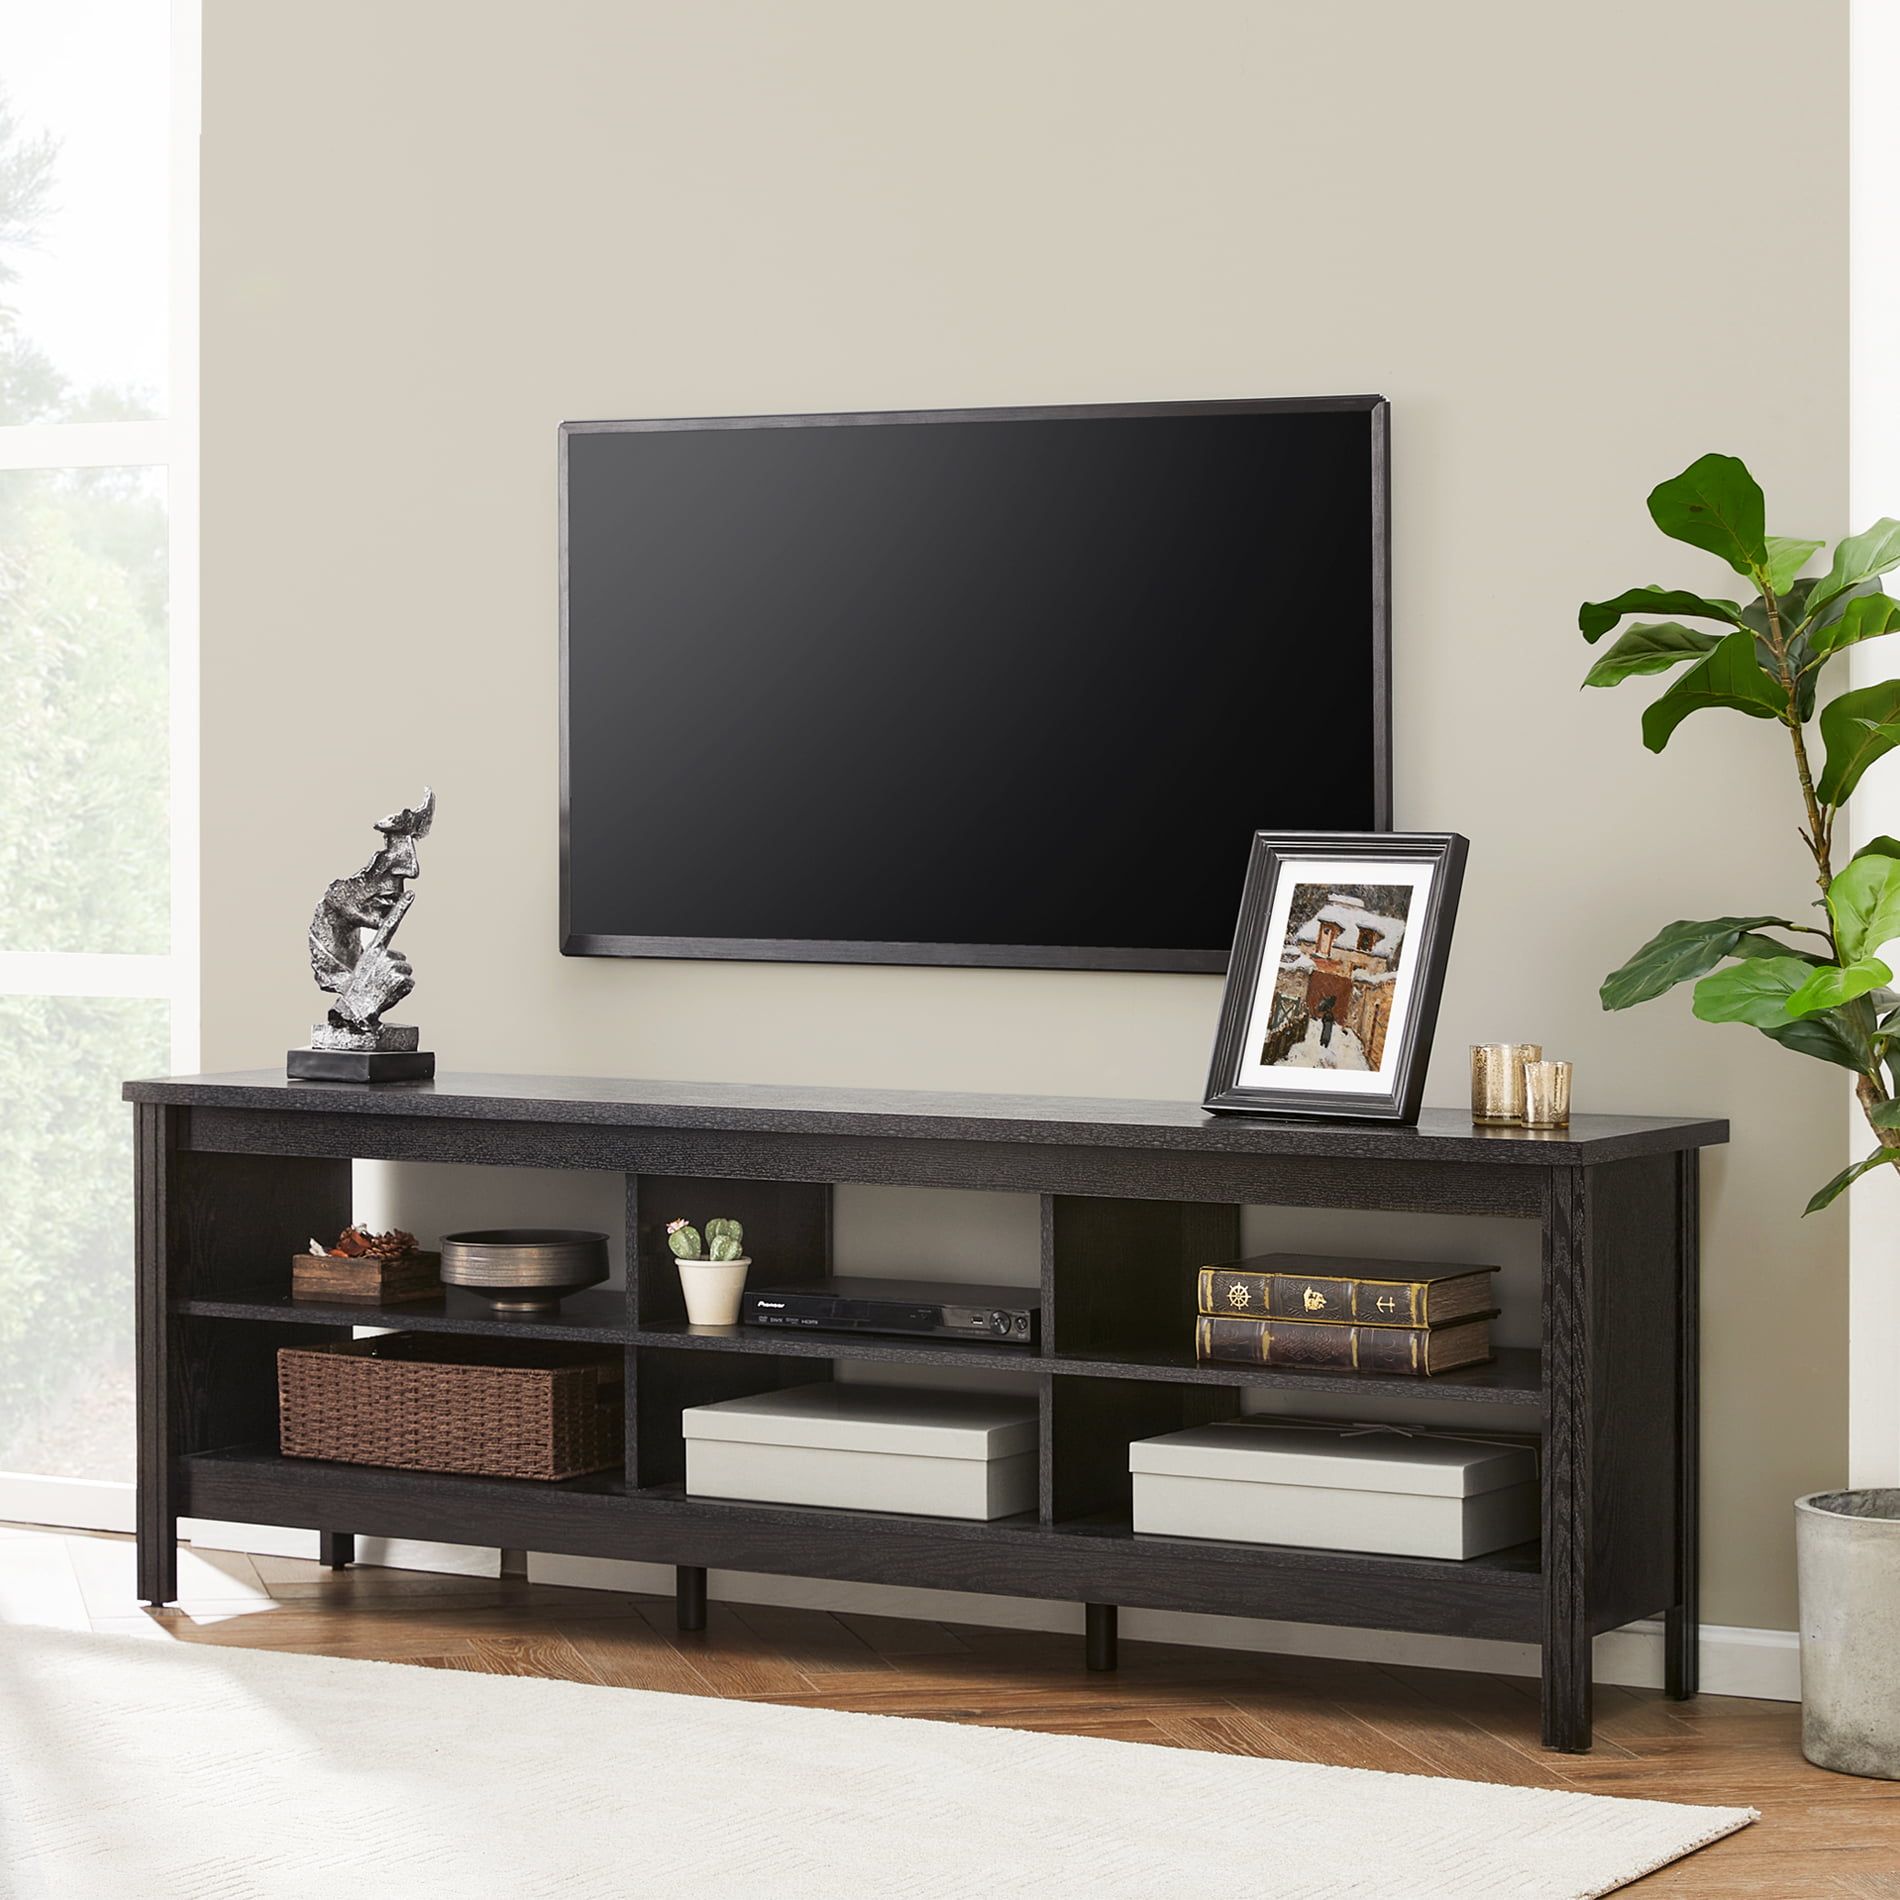 Farmhouse Tv Stands For 75 Inch Flat Screen Media Console Storage With Regard To Stand For Flat Screen (Gallery 10 of 20)